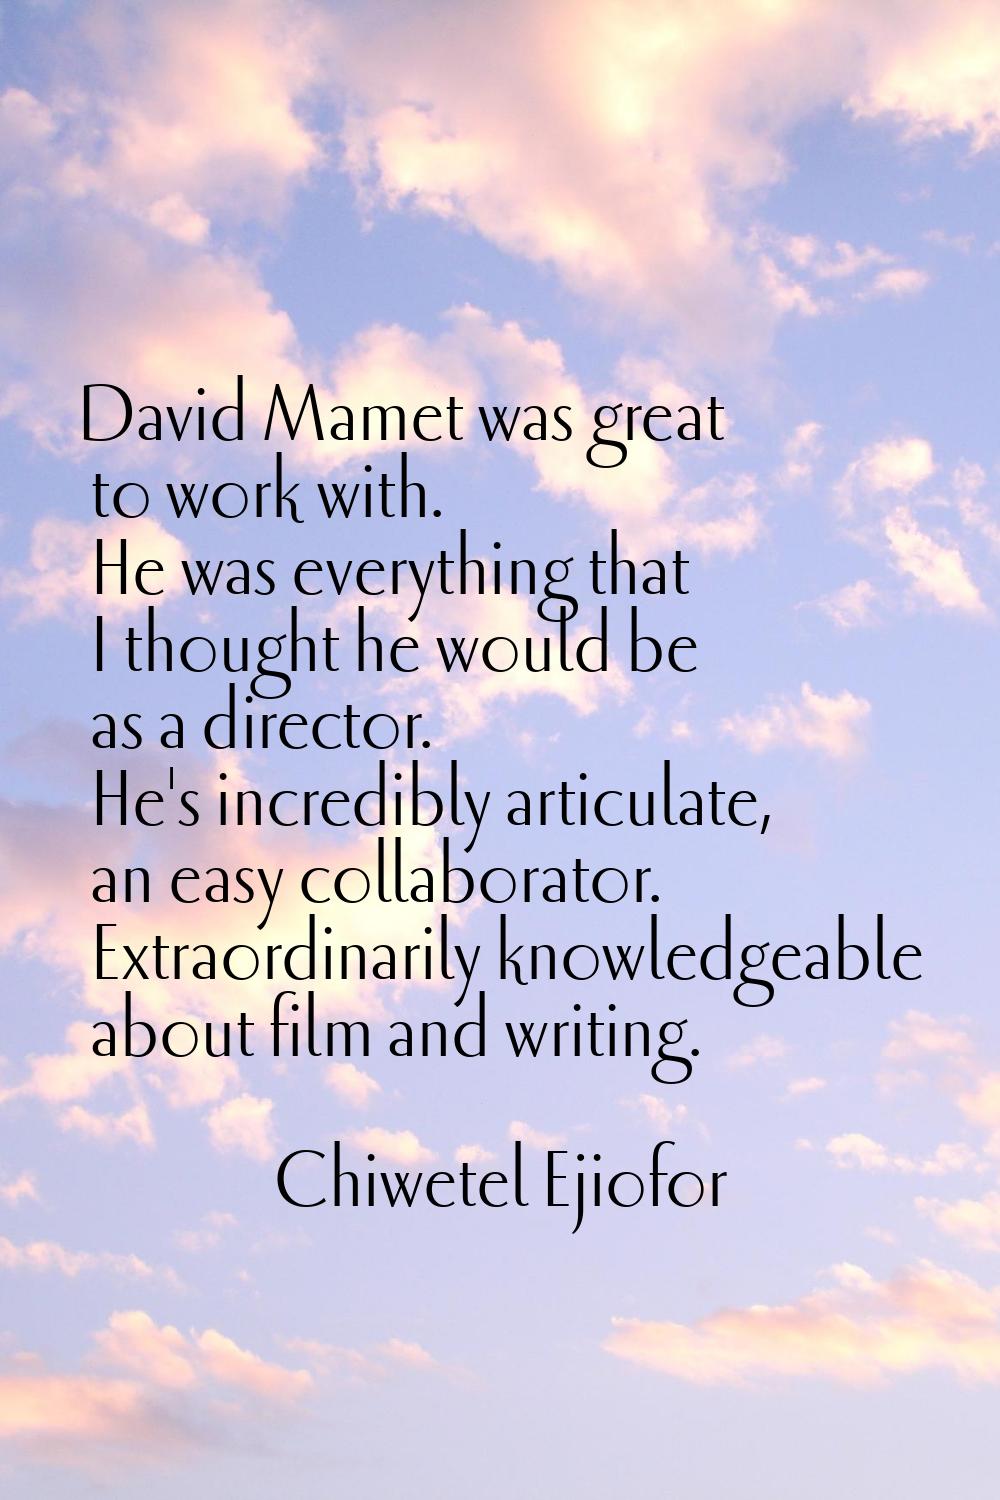 David Mamet was great to work with. He was everything that I thought he would be as a director. He'